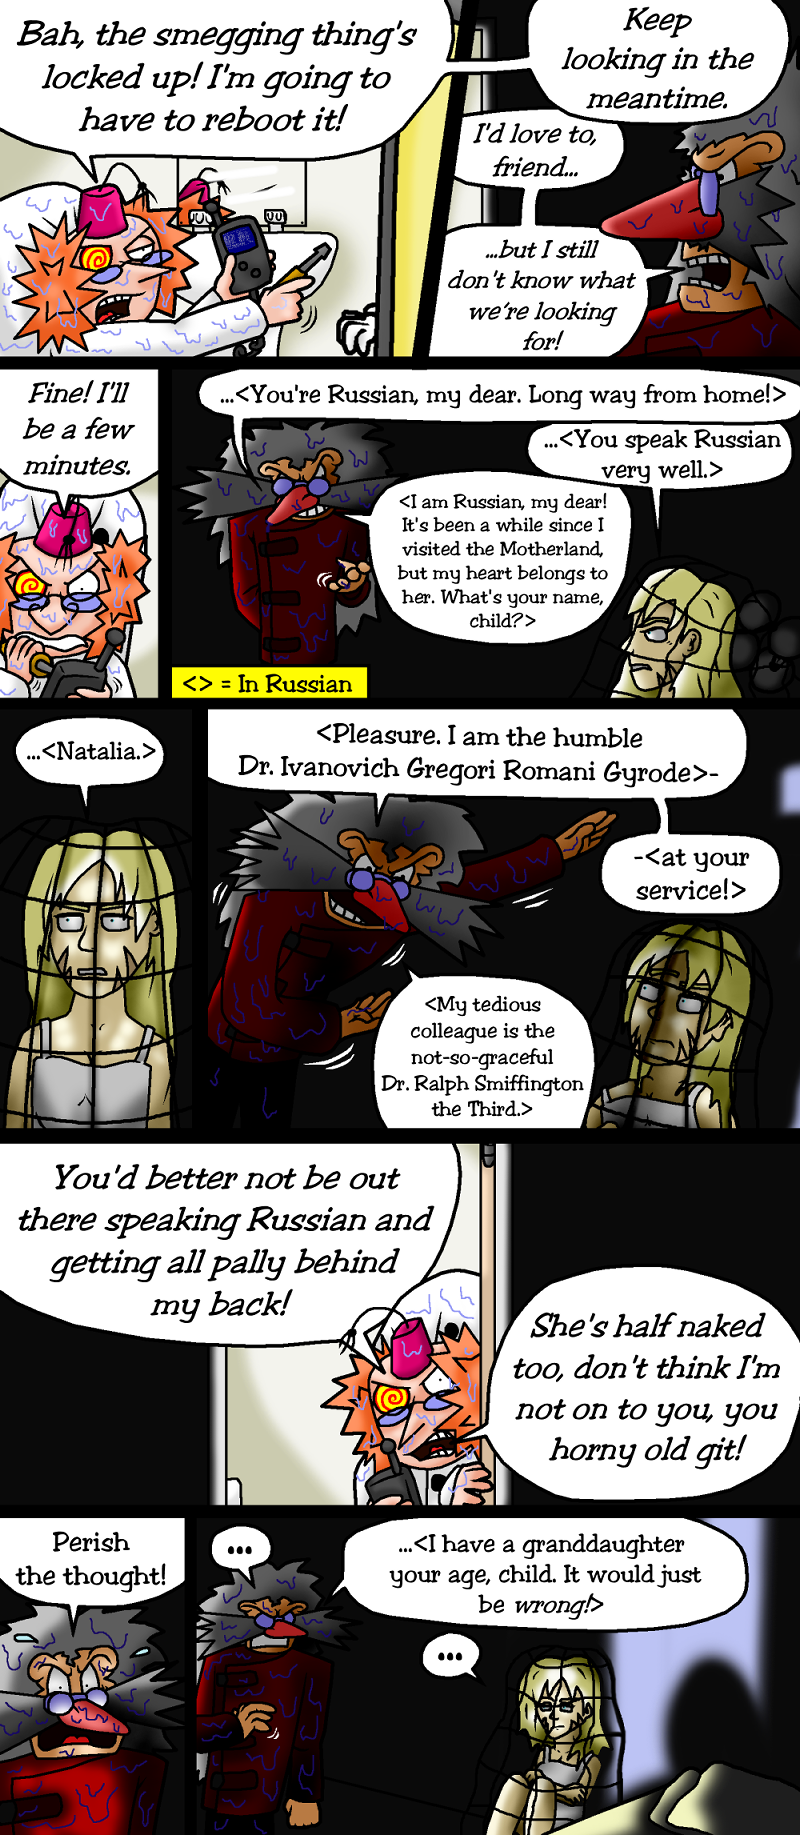 2-13 - Russian Discussion
